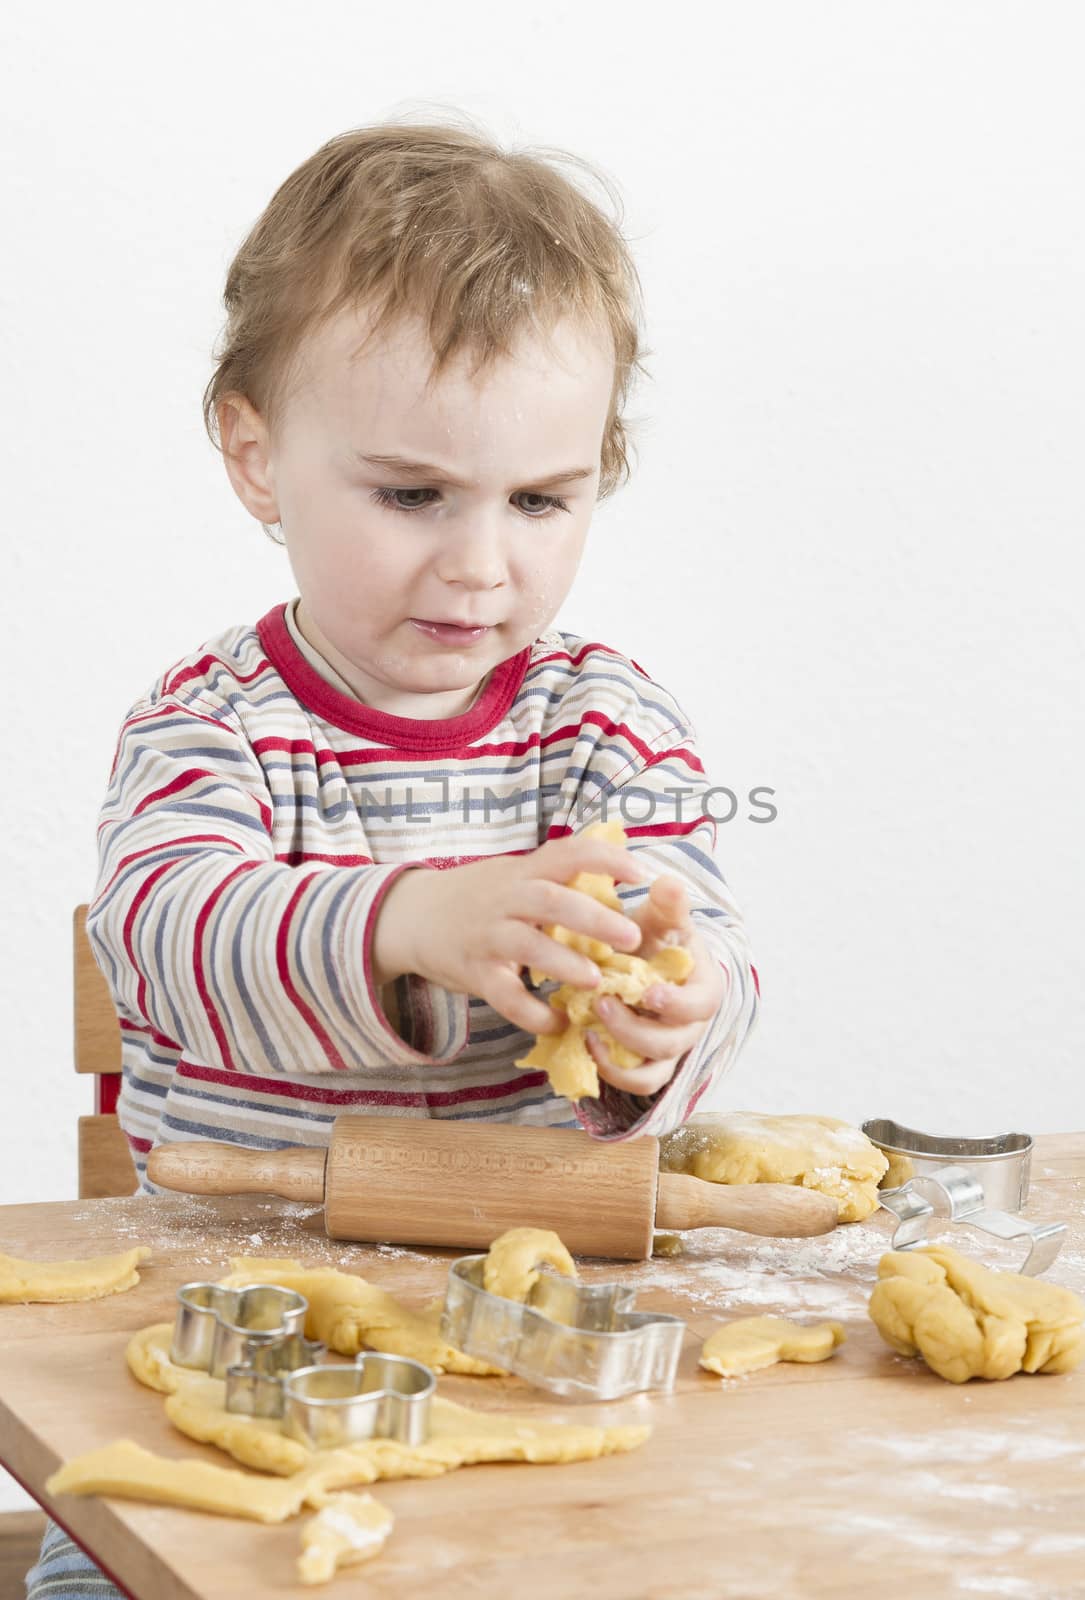 young child in vertical image looking at baking tools and working with dough